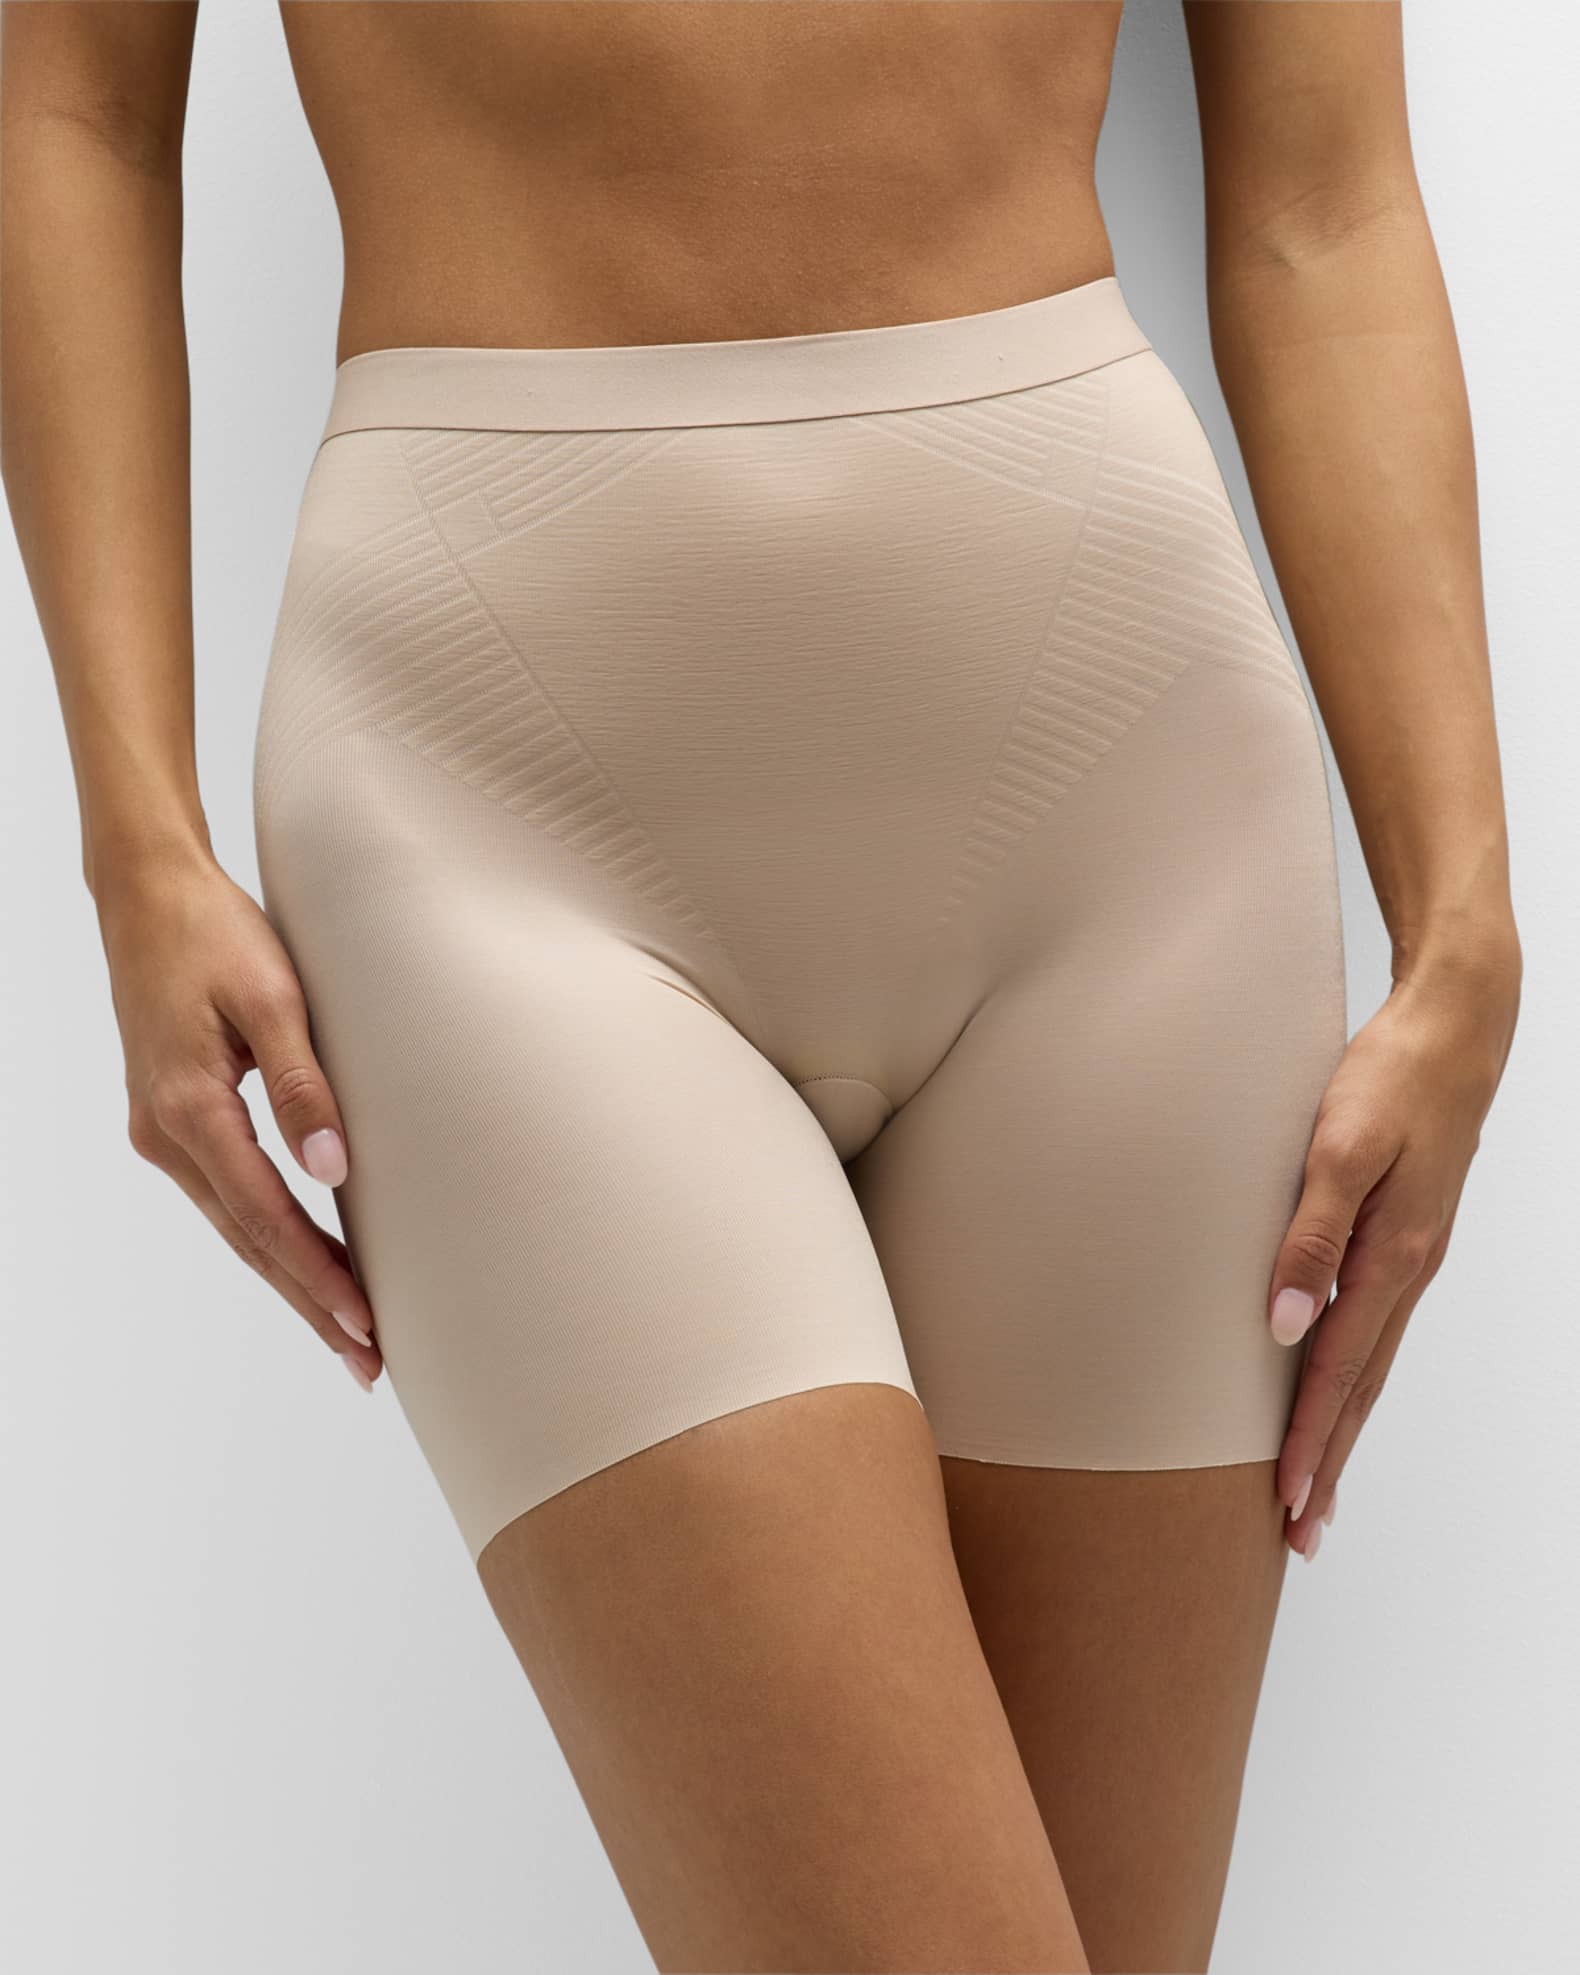 Assets By Sara Blakely a Spanx Brand Women's Mid-thigh Slimmers